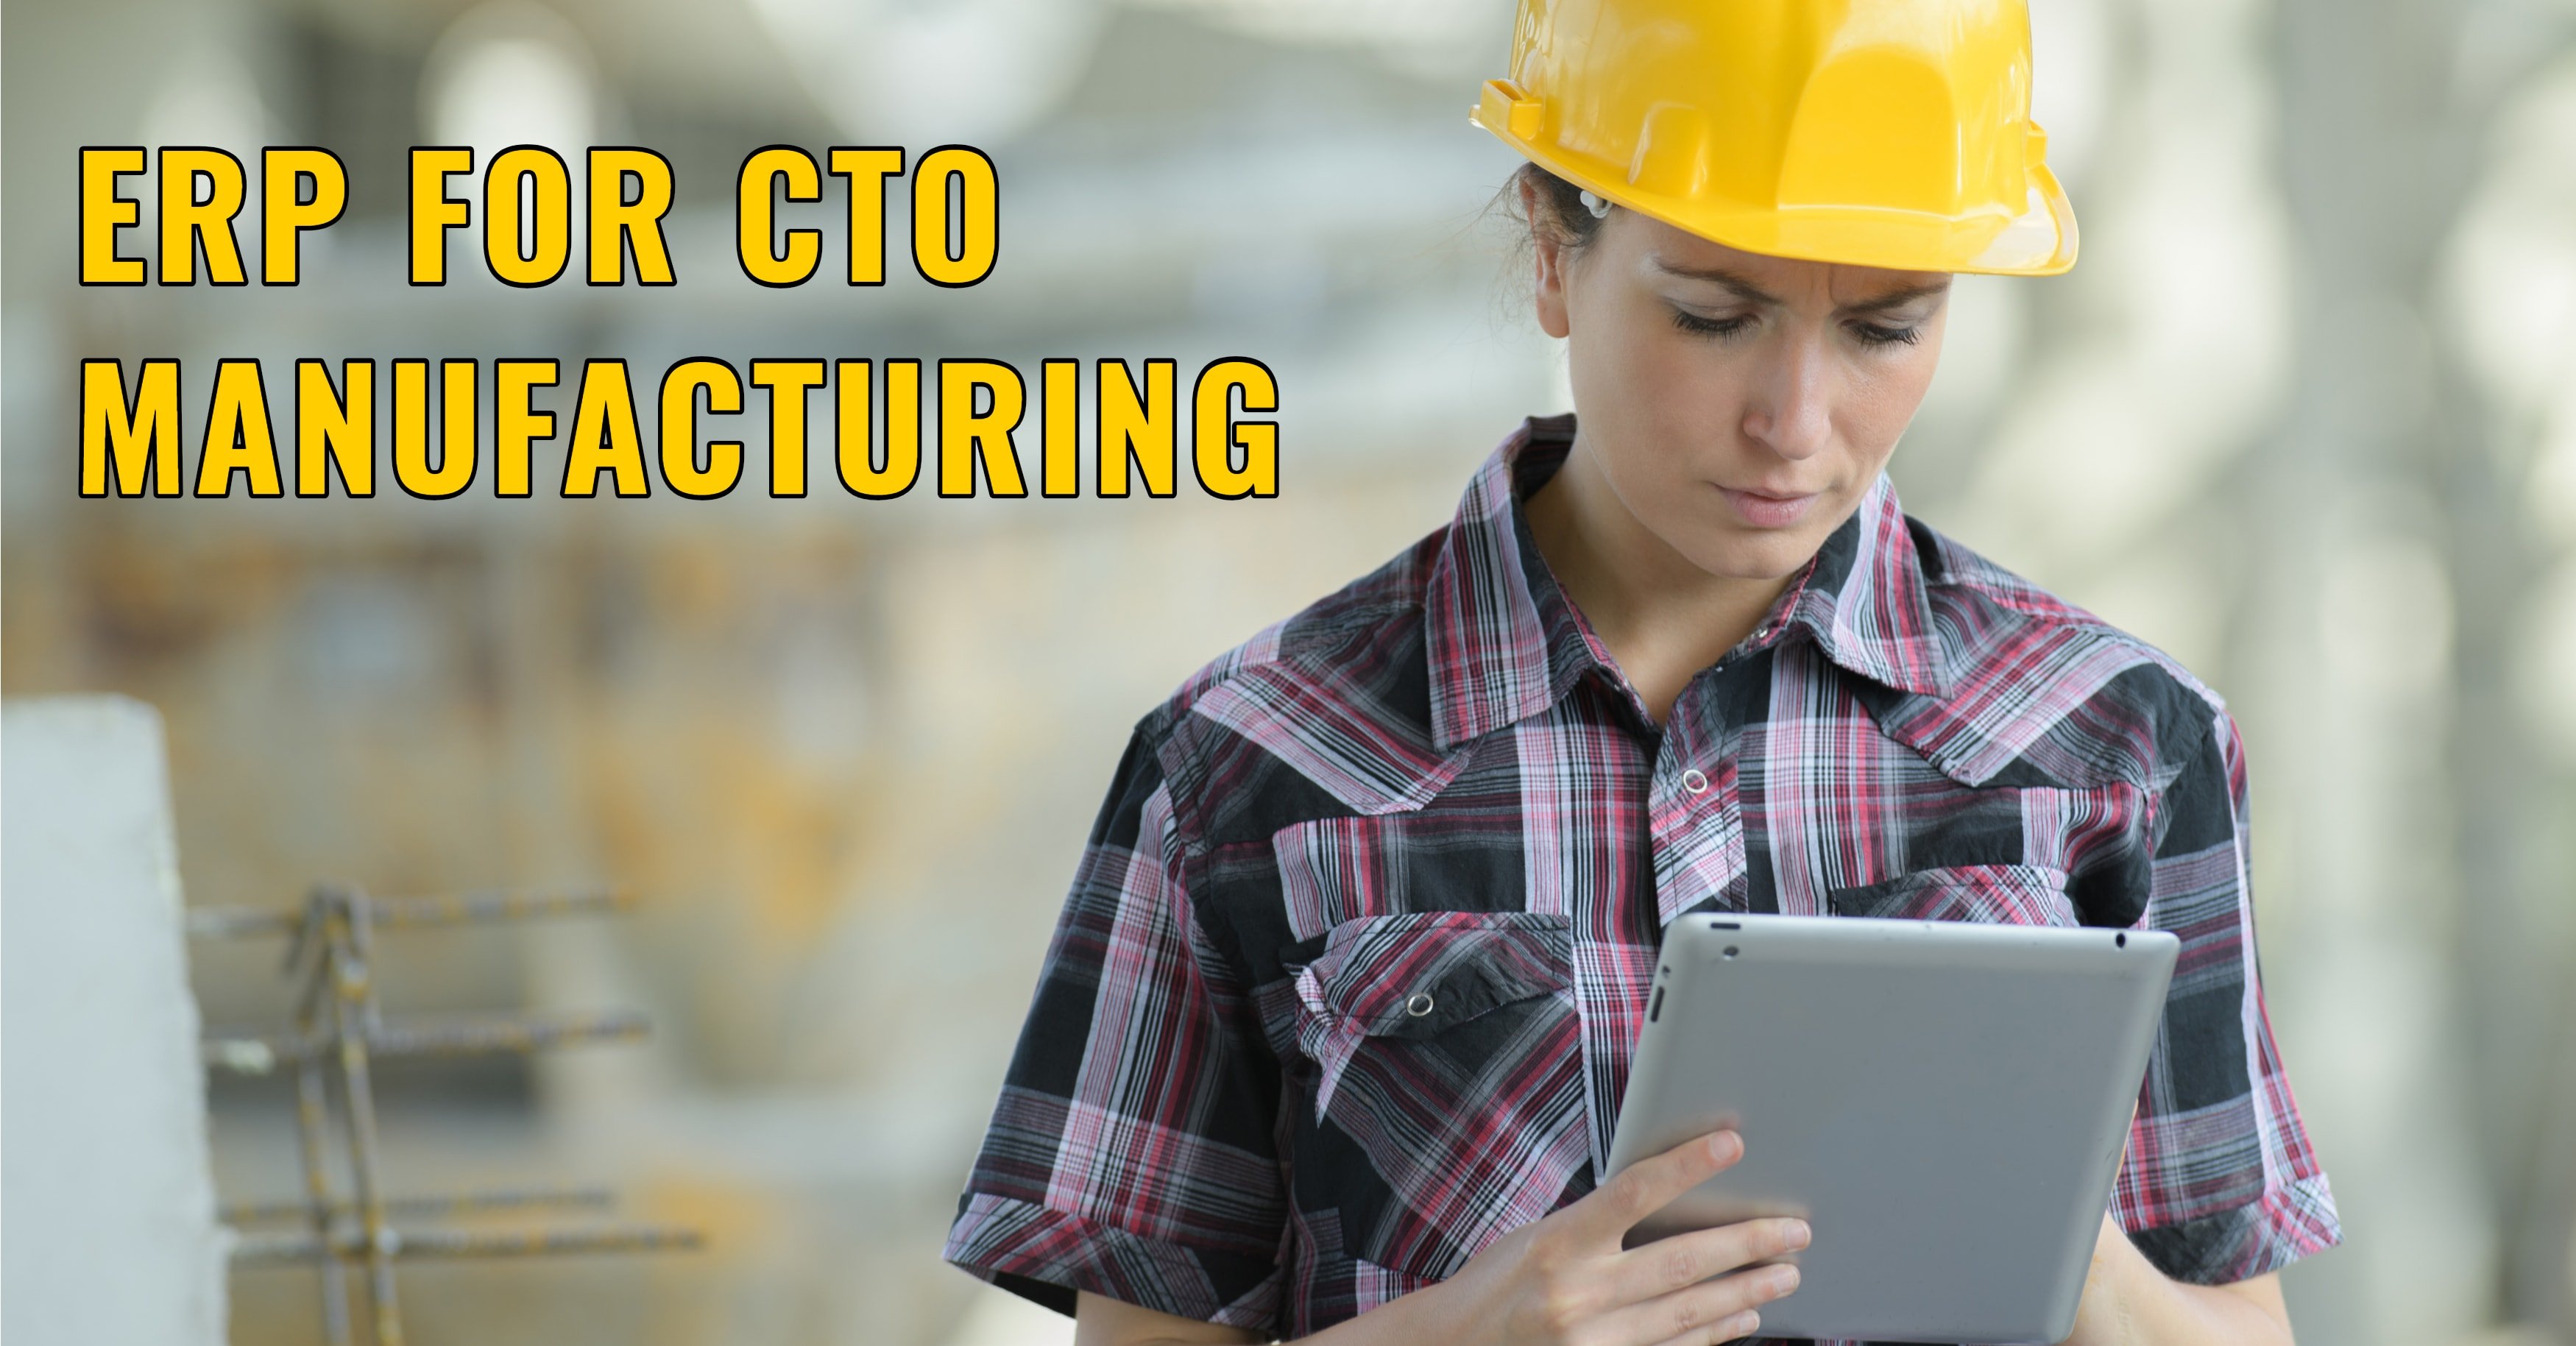 ERP CTO Manufacturing